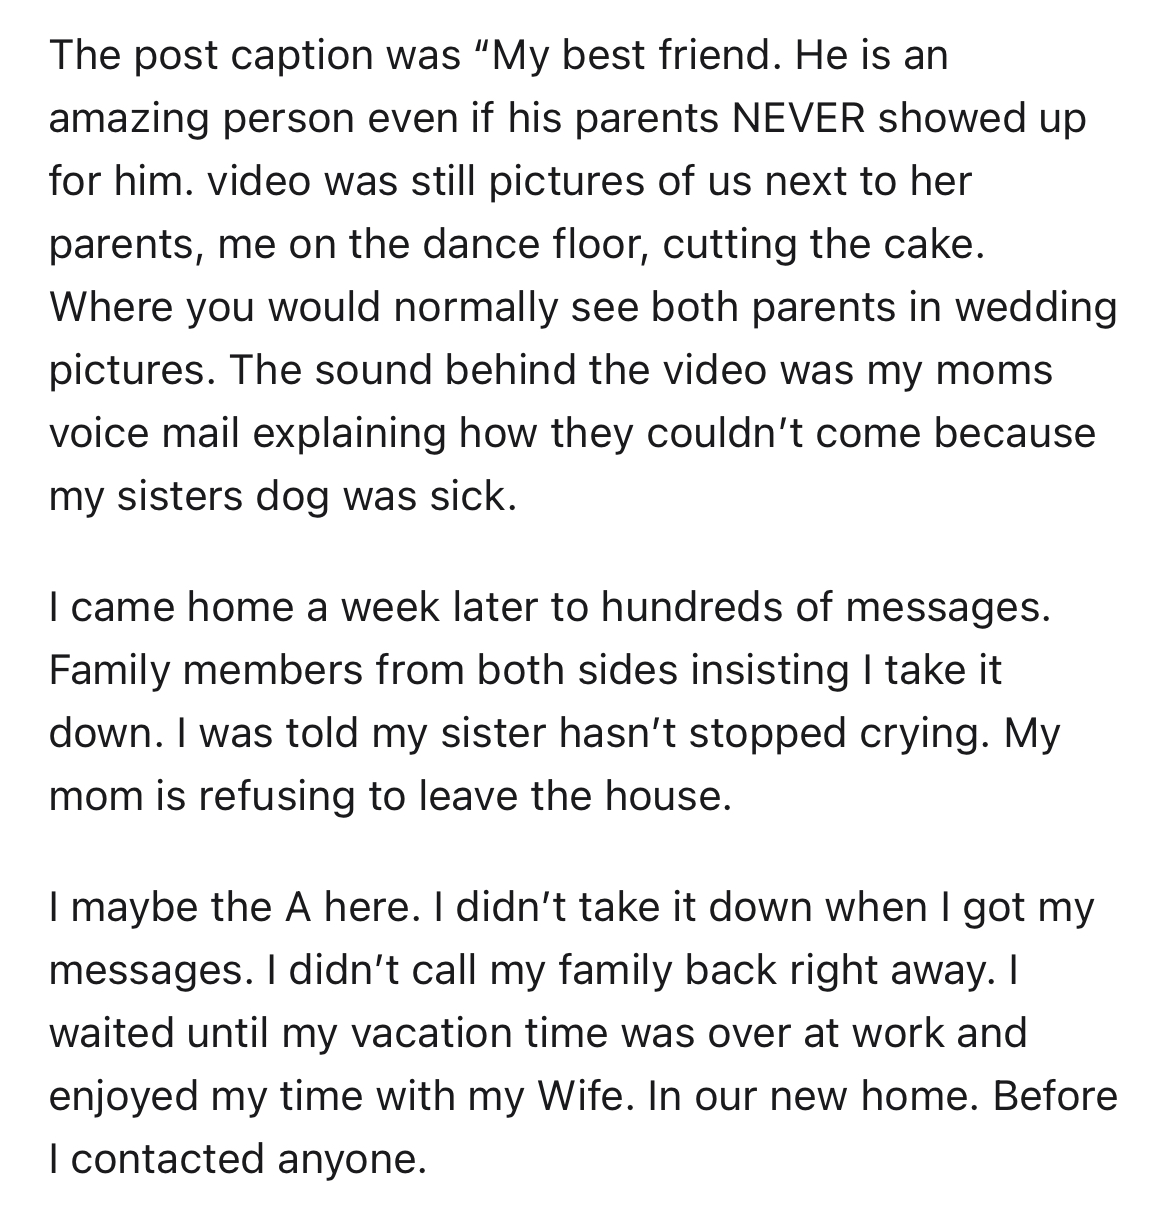 AITA groom's parents miss wedding best man roasts - document - The post caption was "My best friend. He is an amazing person even if his parents Never showed up for him. video was still pictures of us next to her parents, me on the dance floor, cutting th